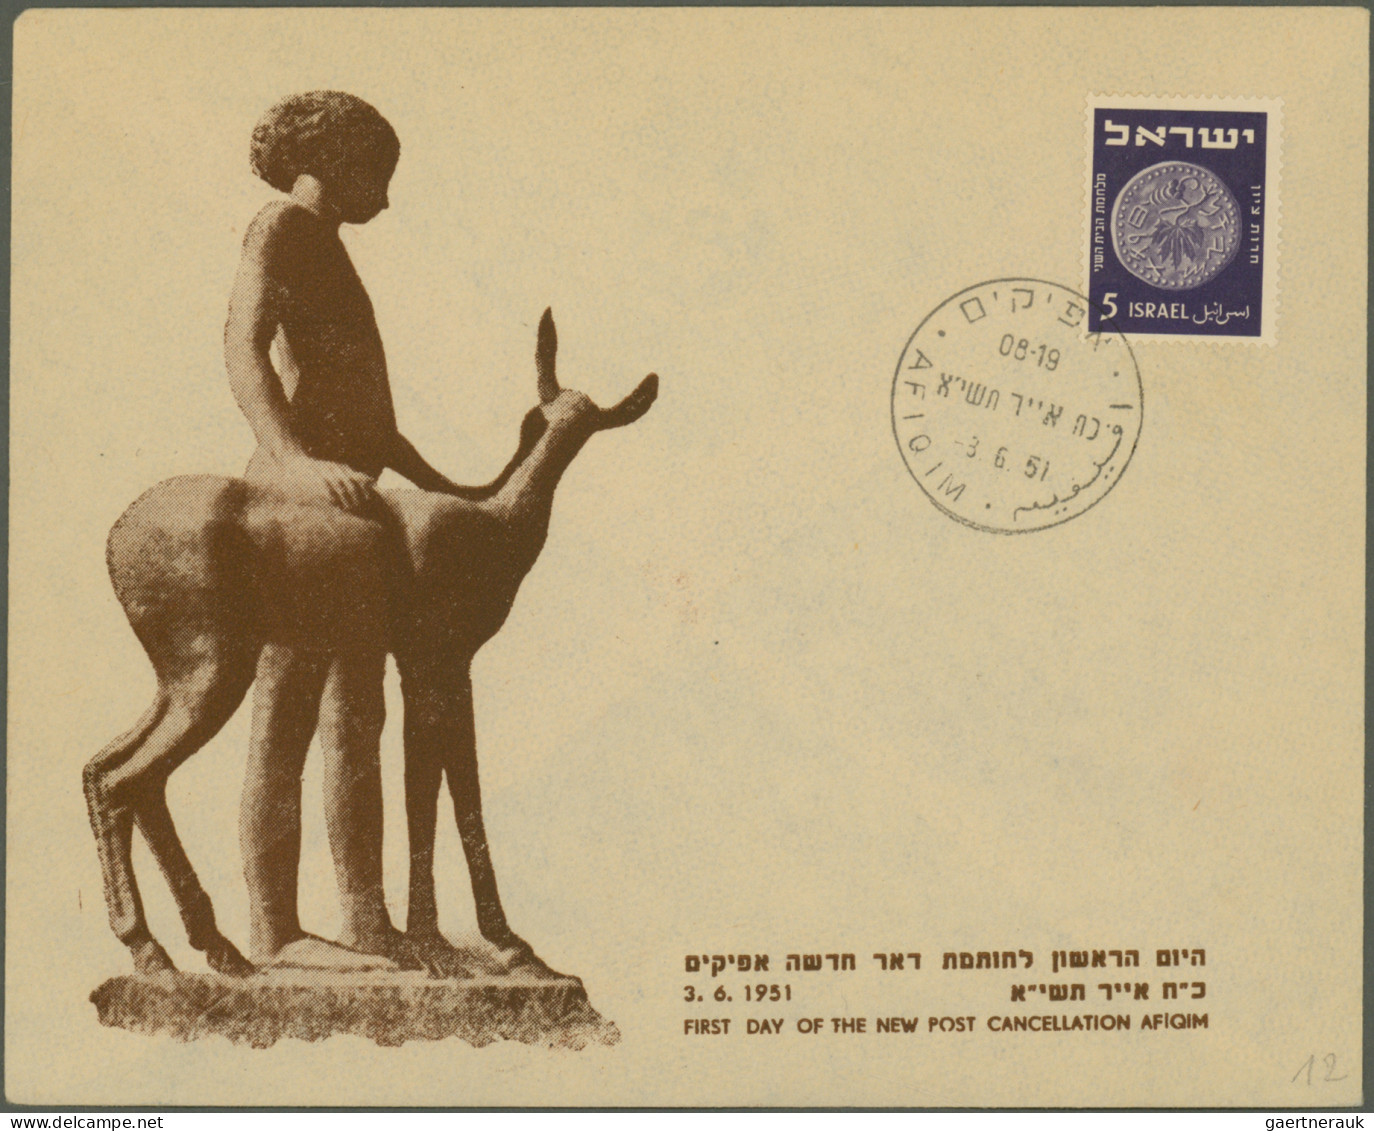 Israel: 1949/1959, holding of apprx 210 covers/cards/used stationeries, comprisi